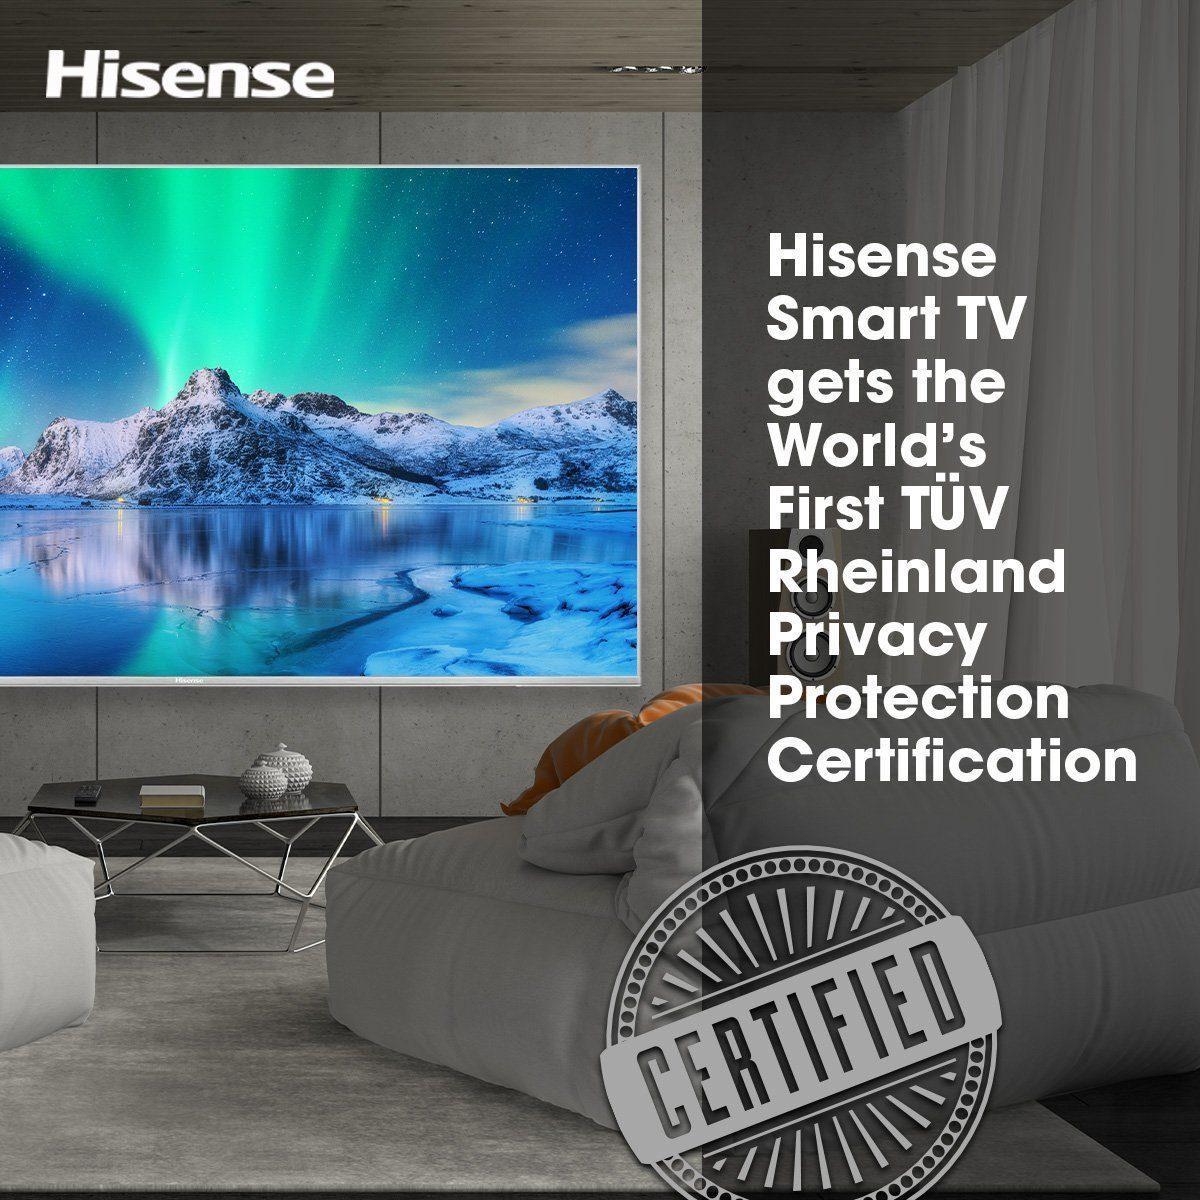 Hisense Smart TV Gets the World’s First TÜV Rheinland Product Privacy Protection Certification